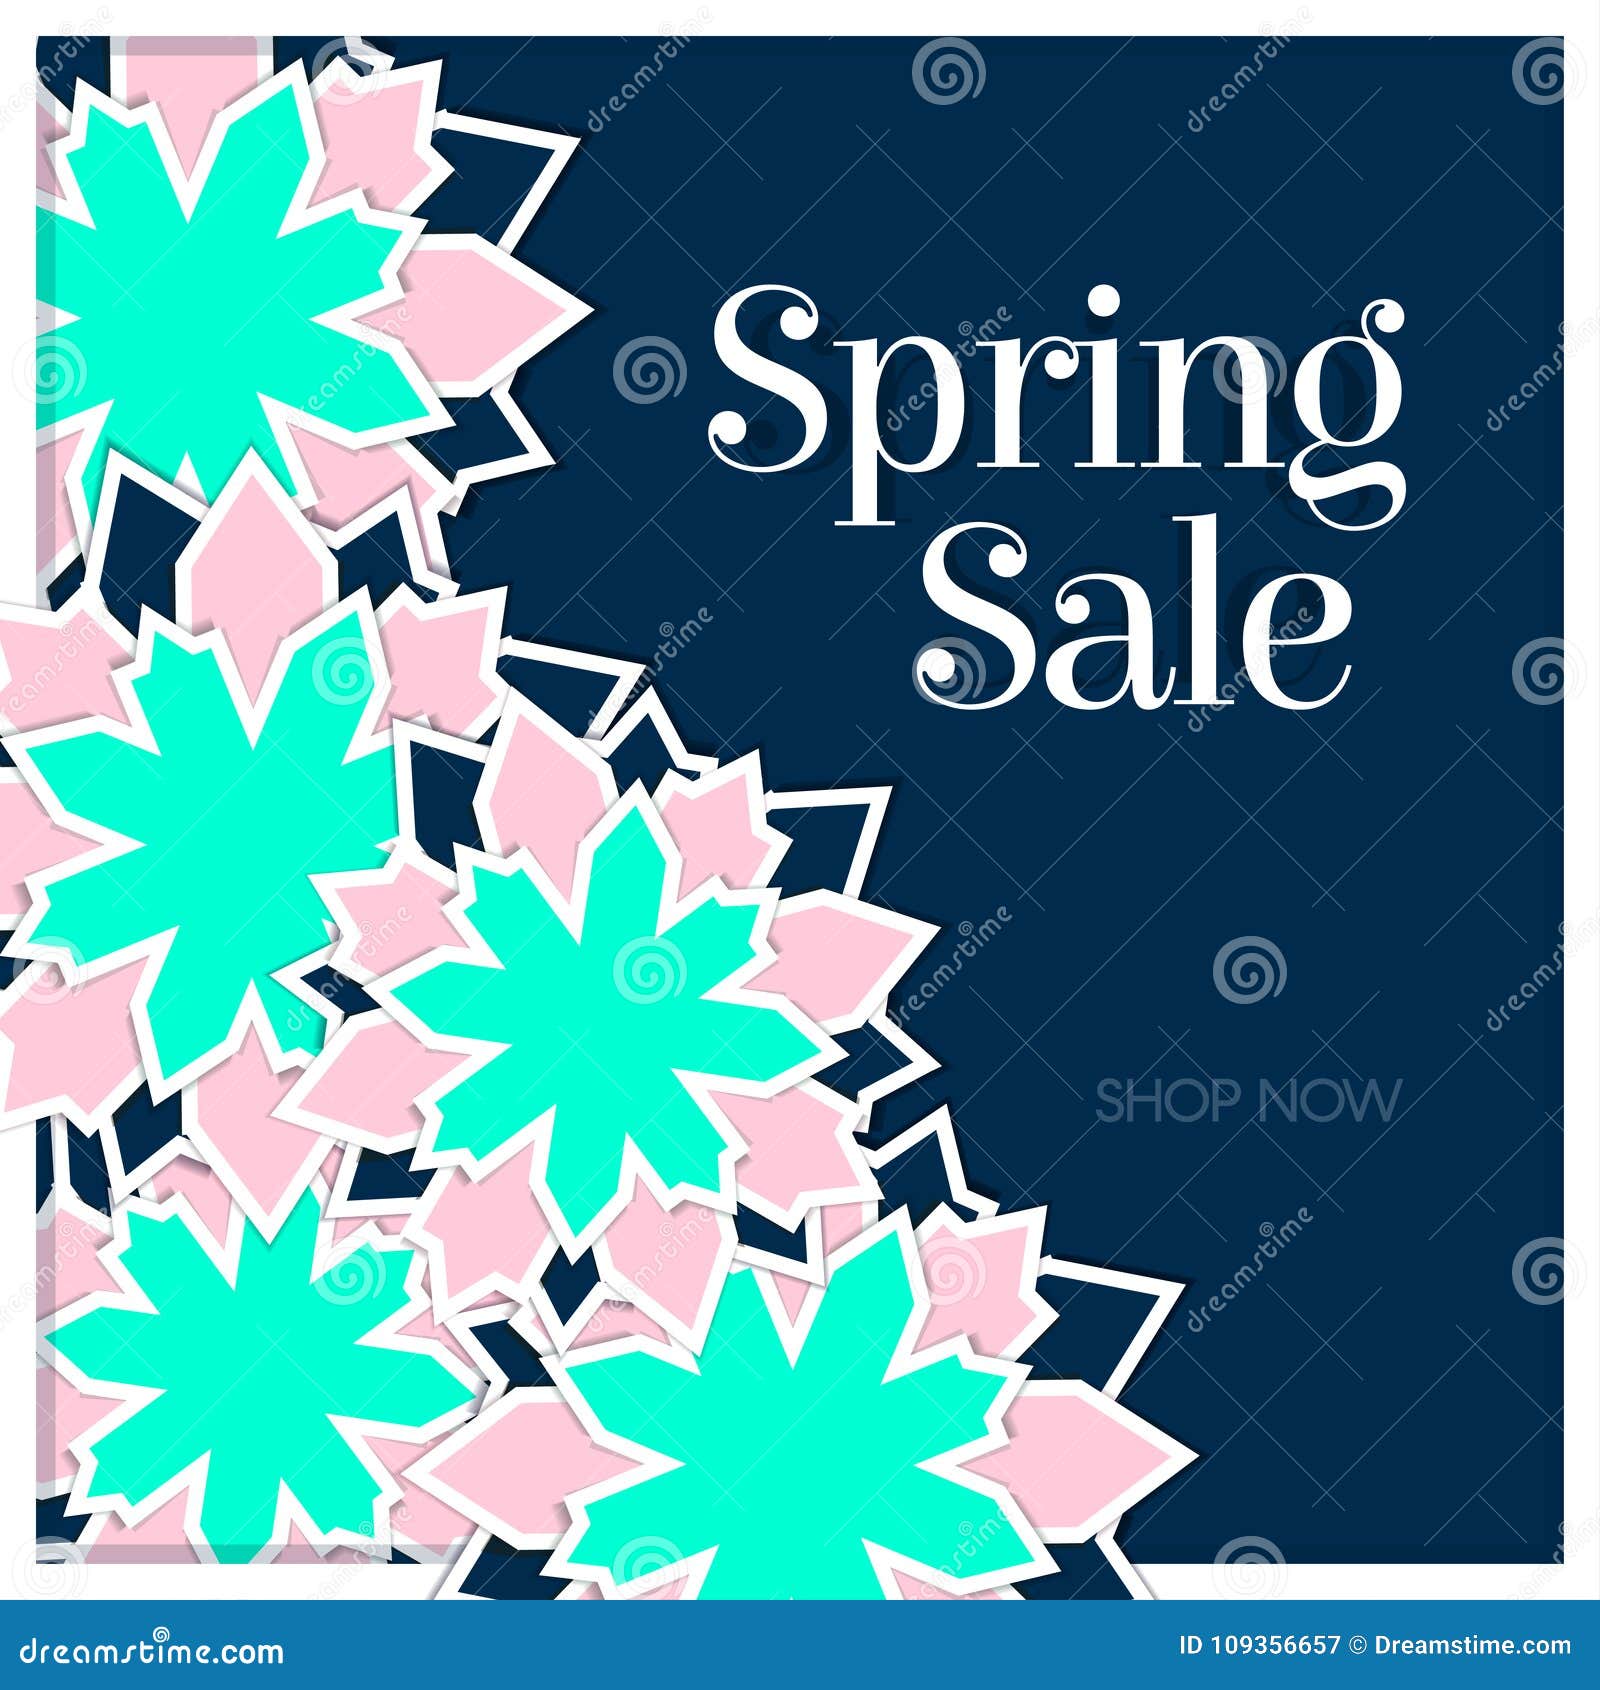 Spring Sale Poster with Paper Flowers. Stock Illustration